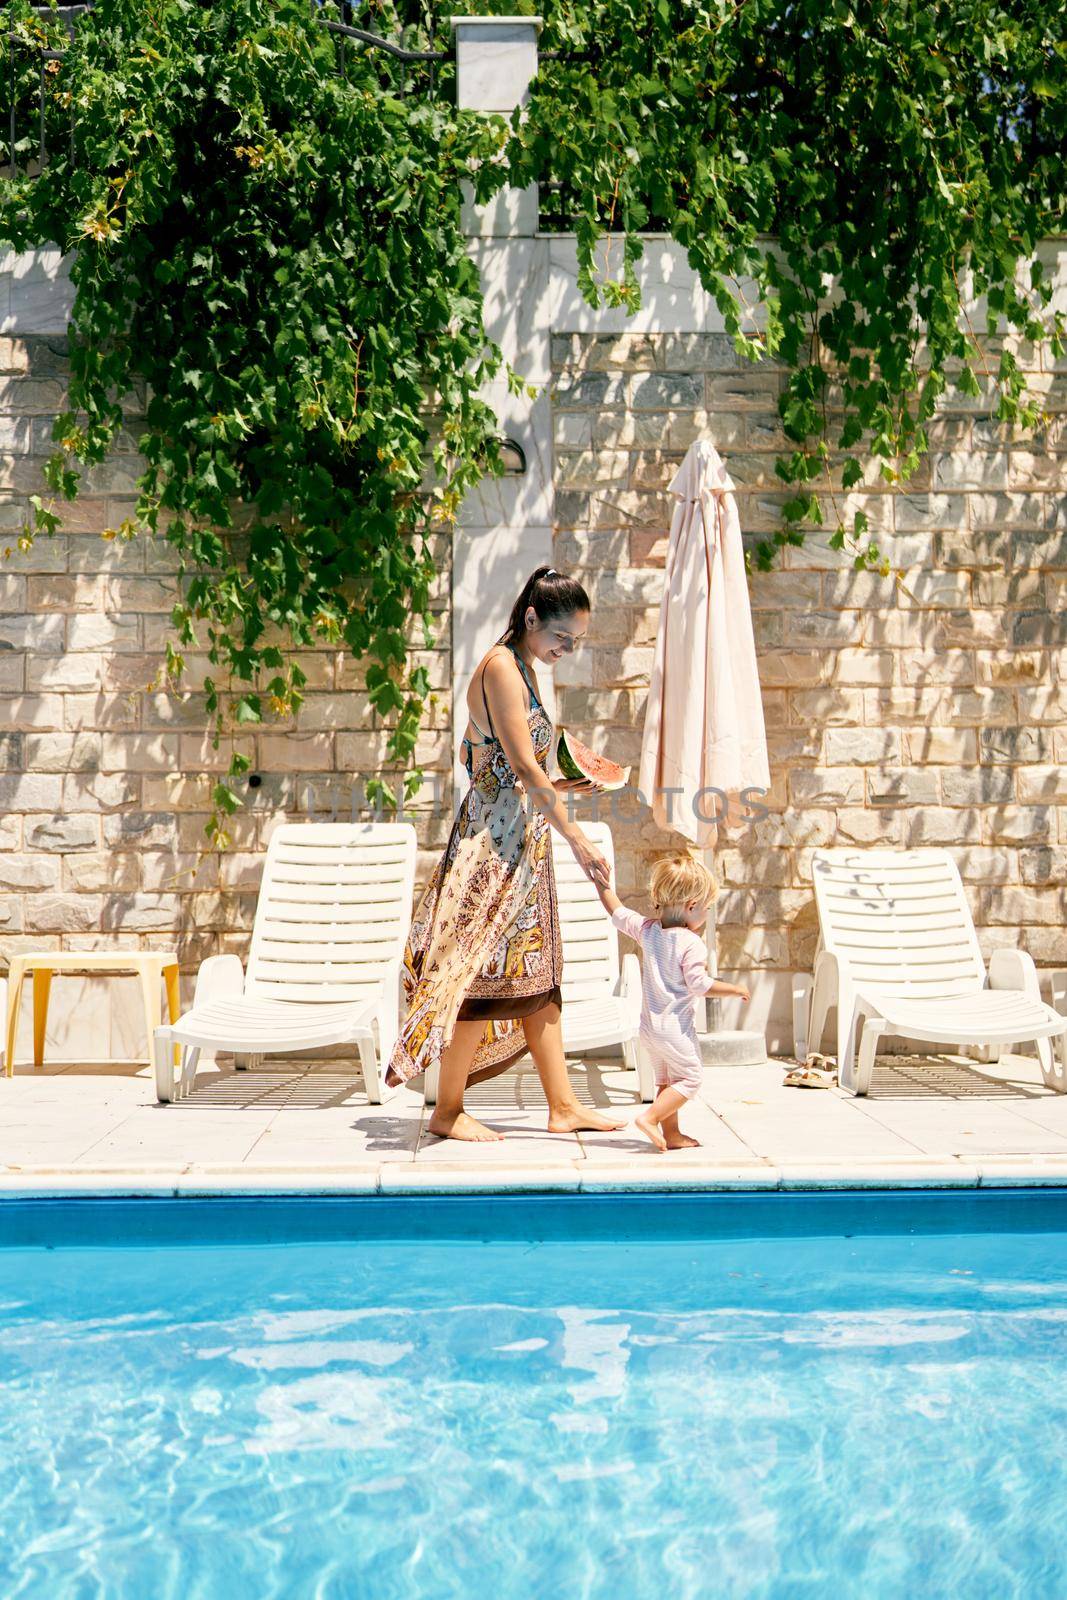 Mom with a watermelon in her hand leads a little girl to a sun lounger. High quality photo